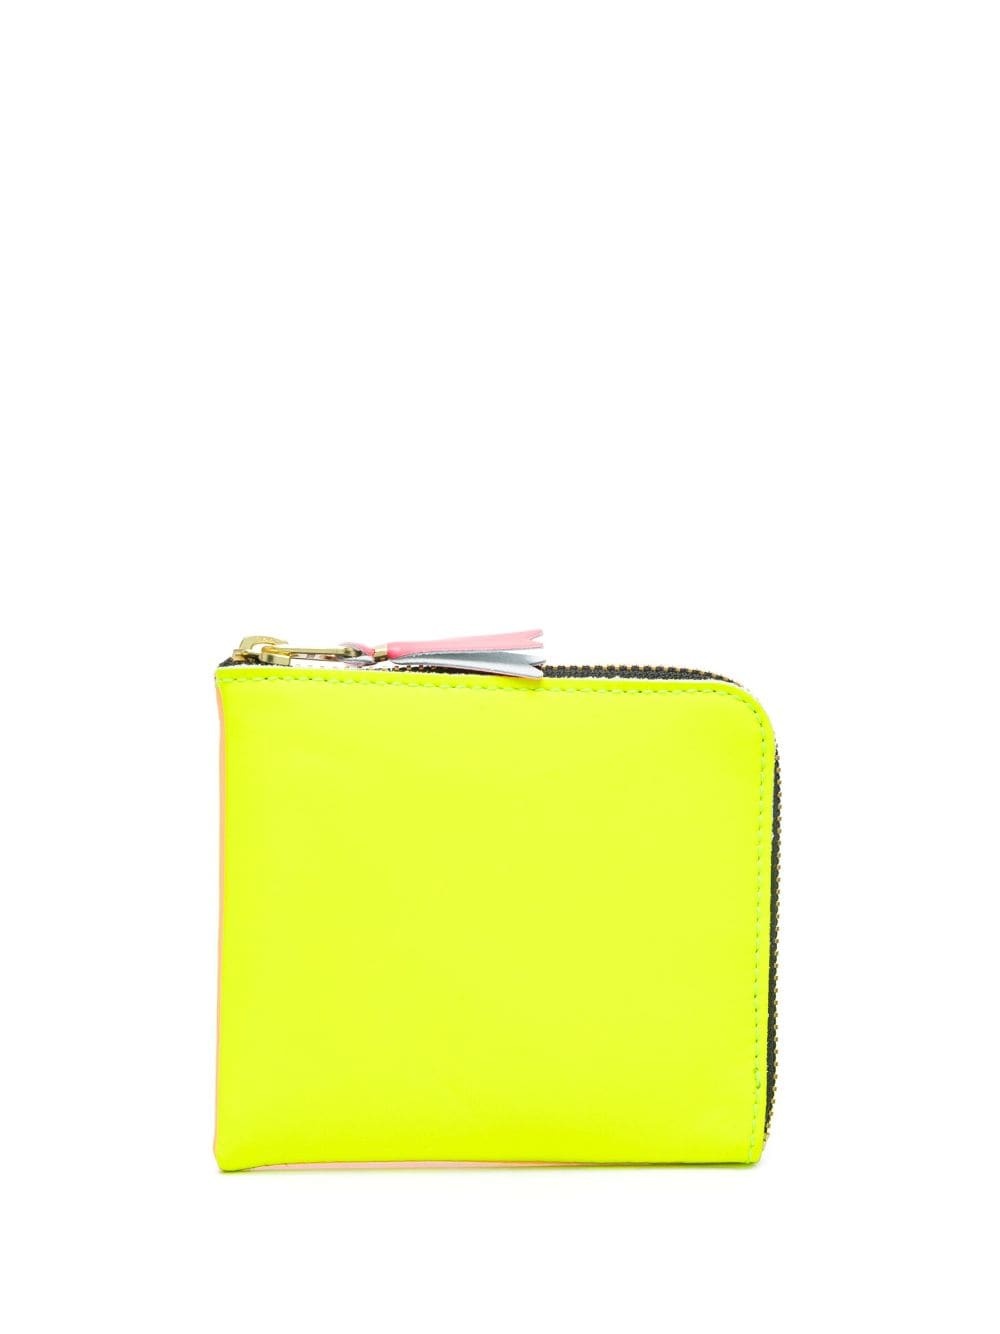 Super Fluo zipped leather wallet - 1